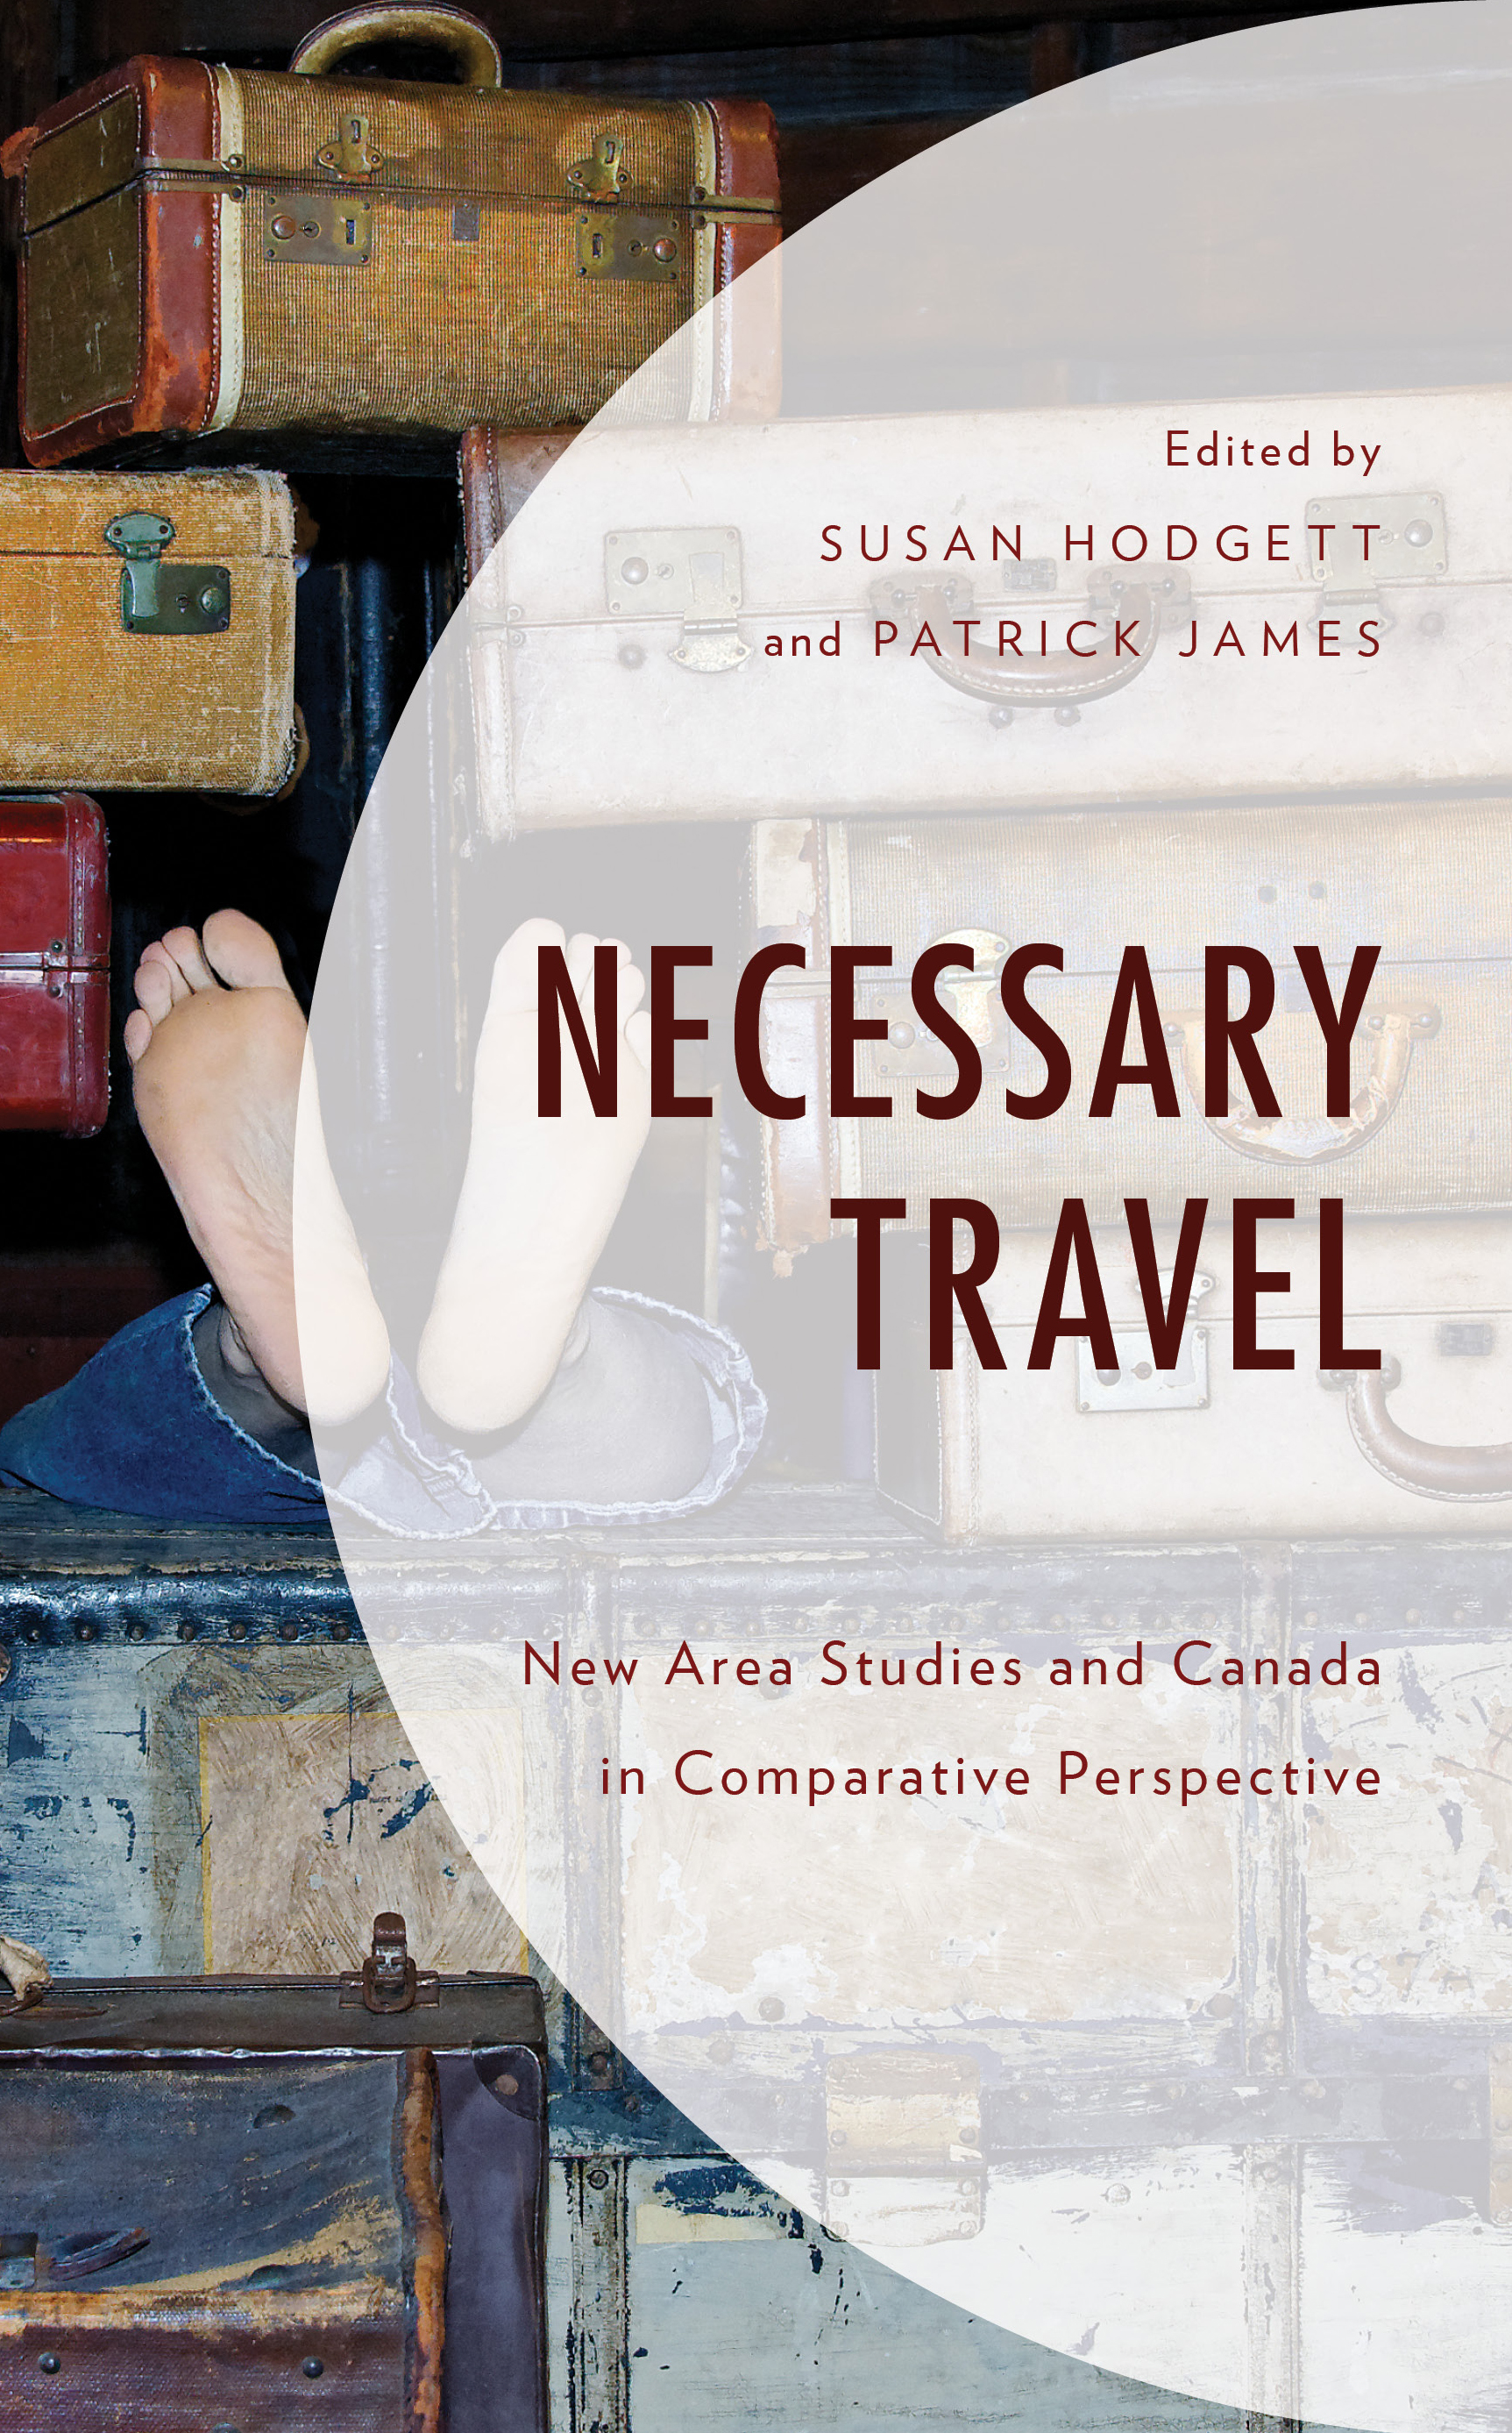 Necessary Travel: New Area Studies and Canada in Comparative Perspective